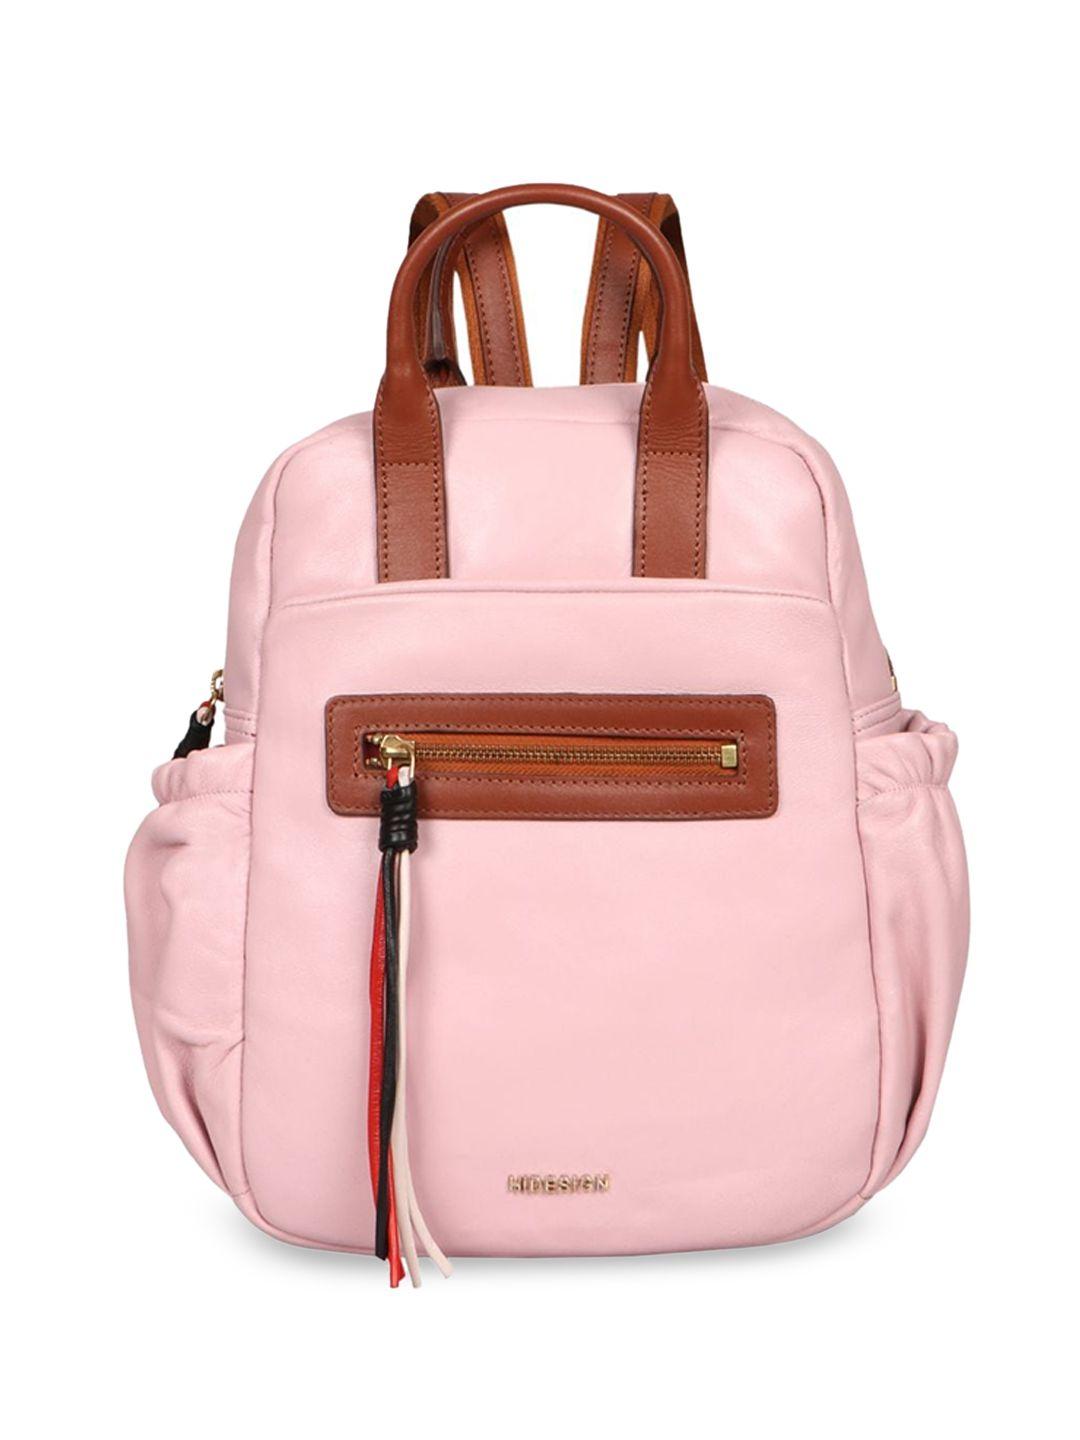 hidesign leather structured backpacks